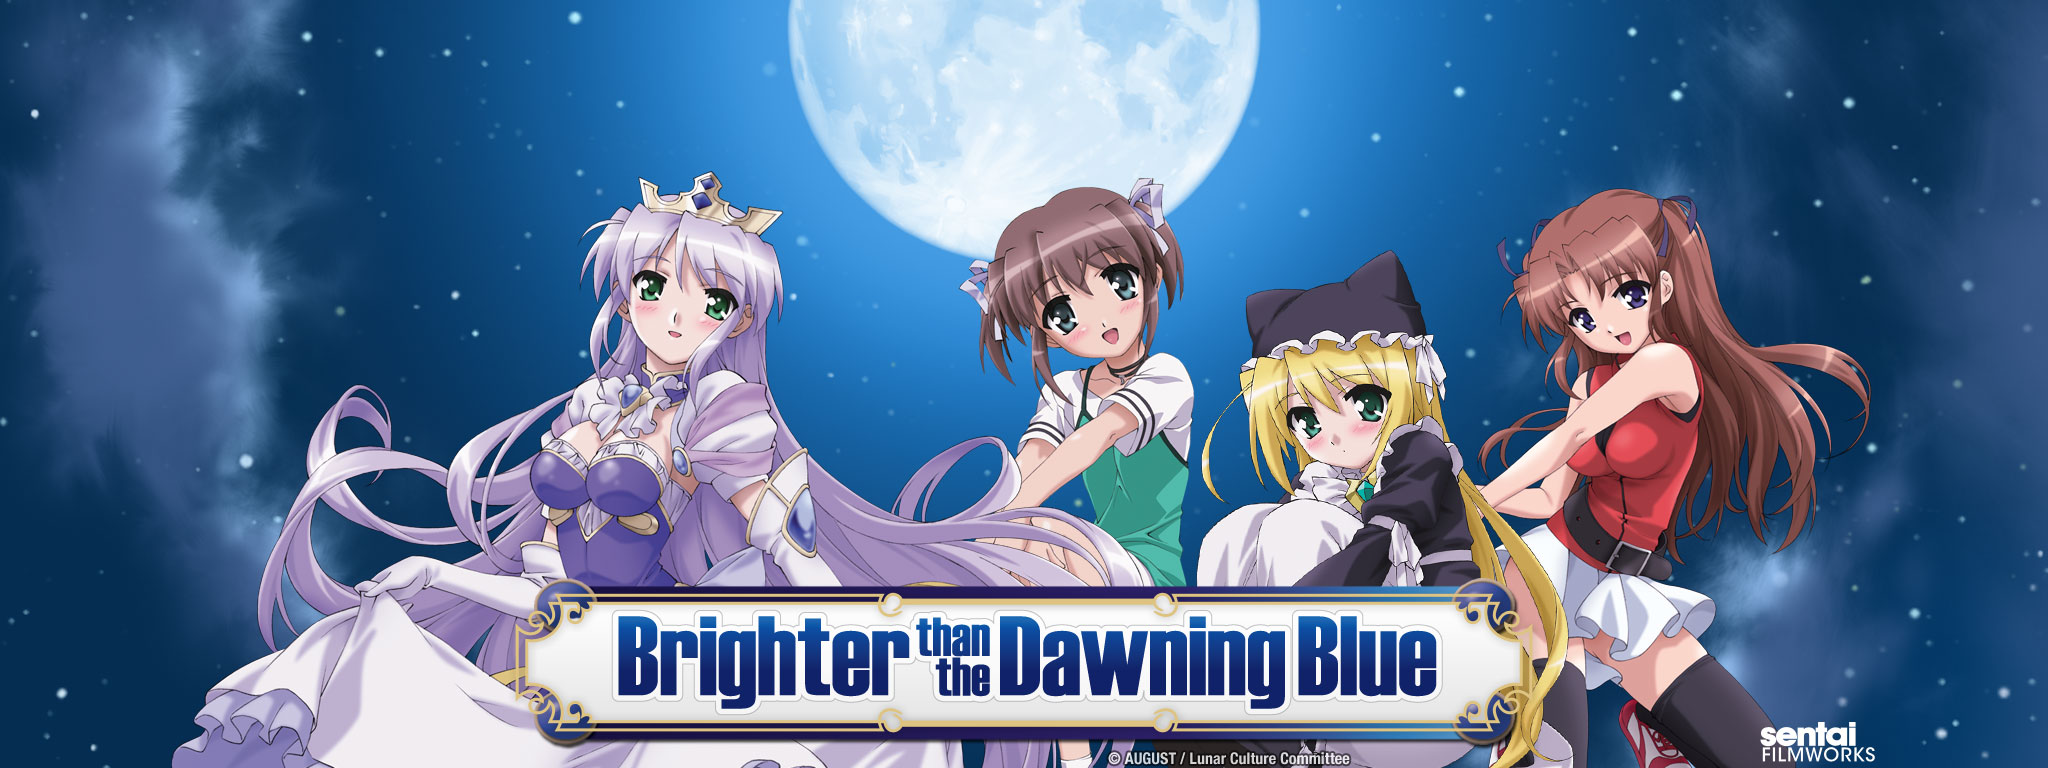 Title Art for Brighter than the Dawning Blue